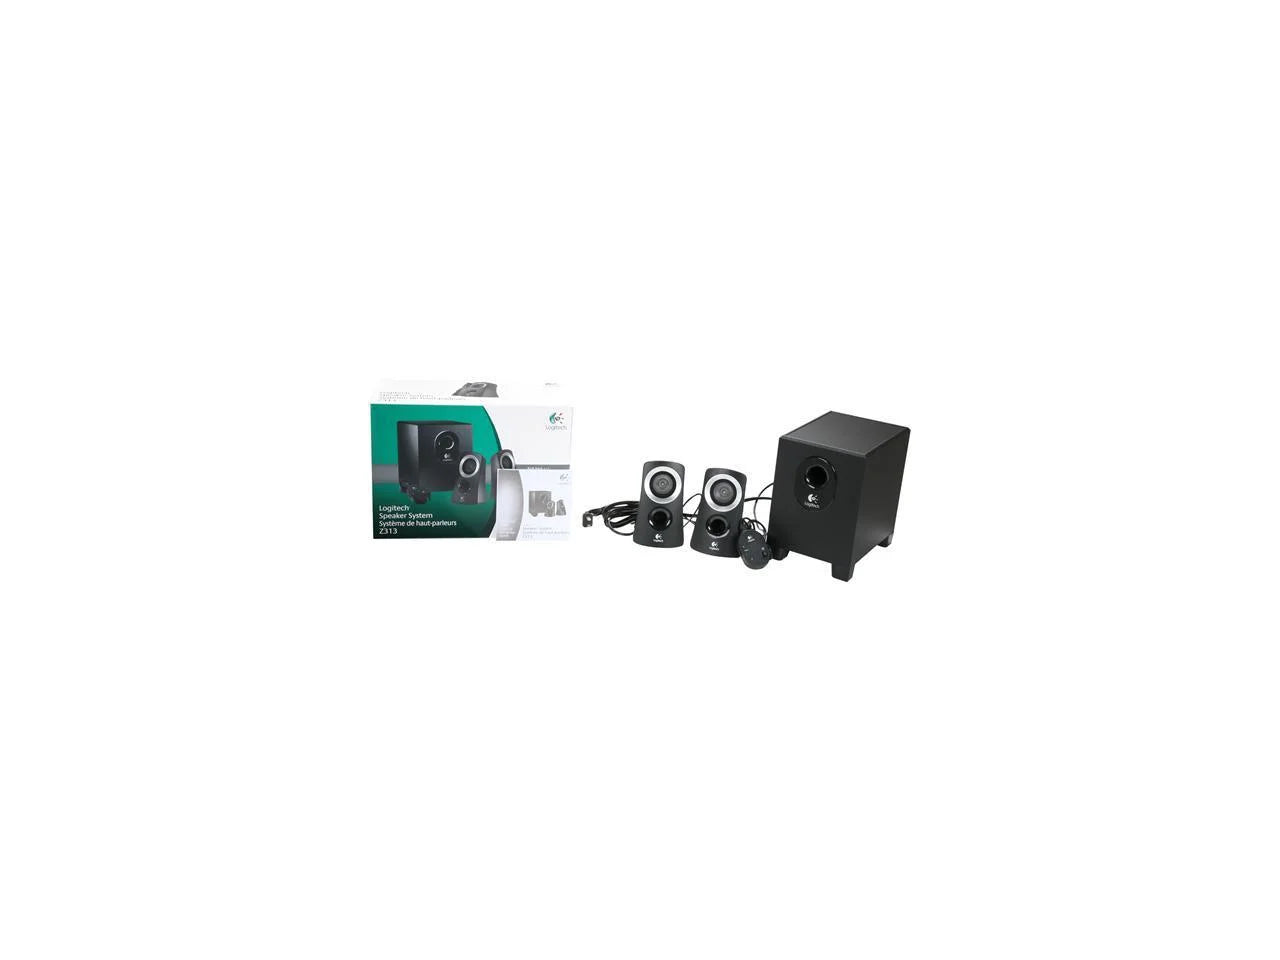 Logitech Z313 2.1 Multimedia Speaker System with Subwoofer Audio 50 Watts Power Strong Bass 3.5Mm Audio Inputs